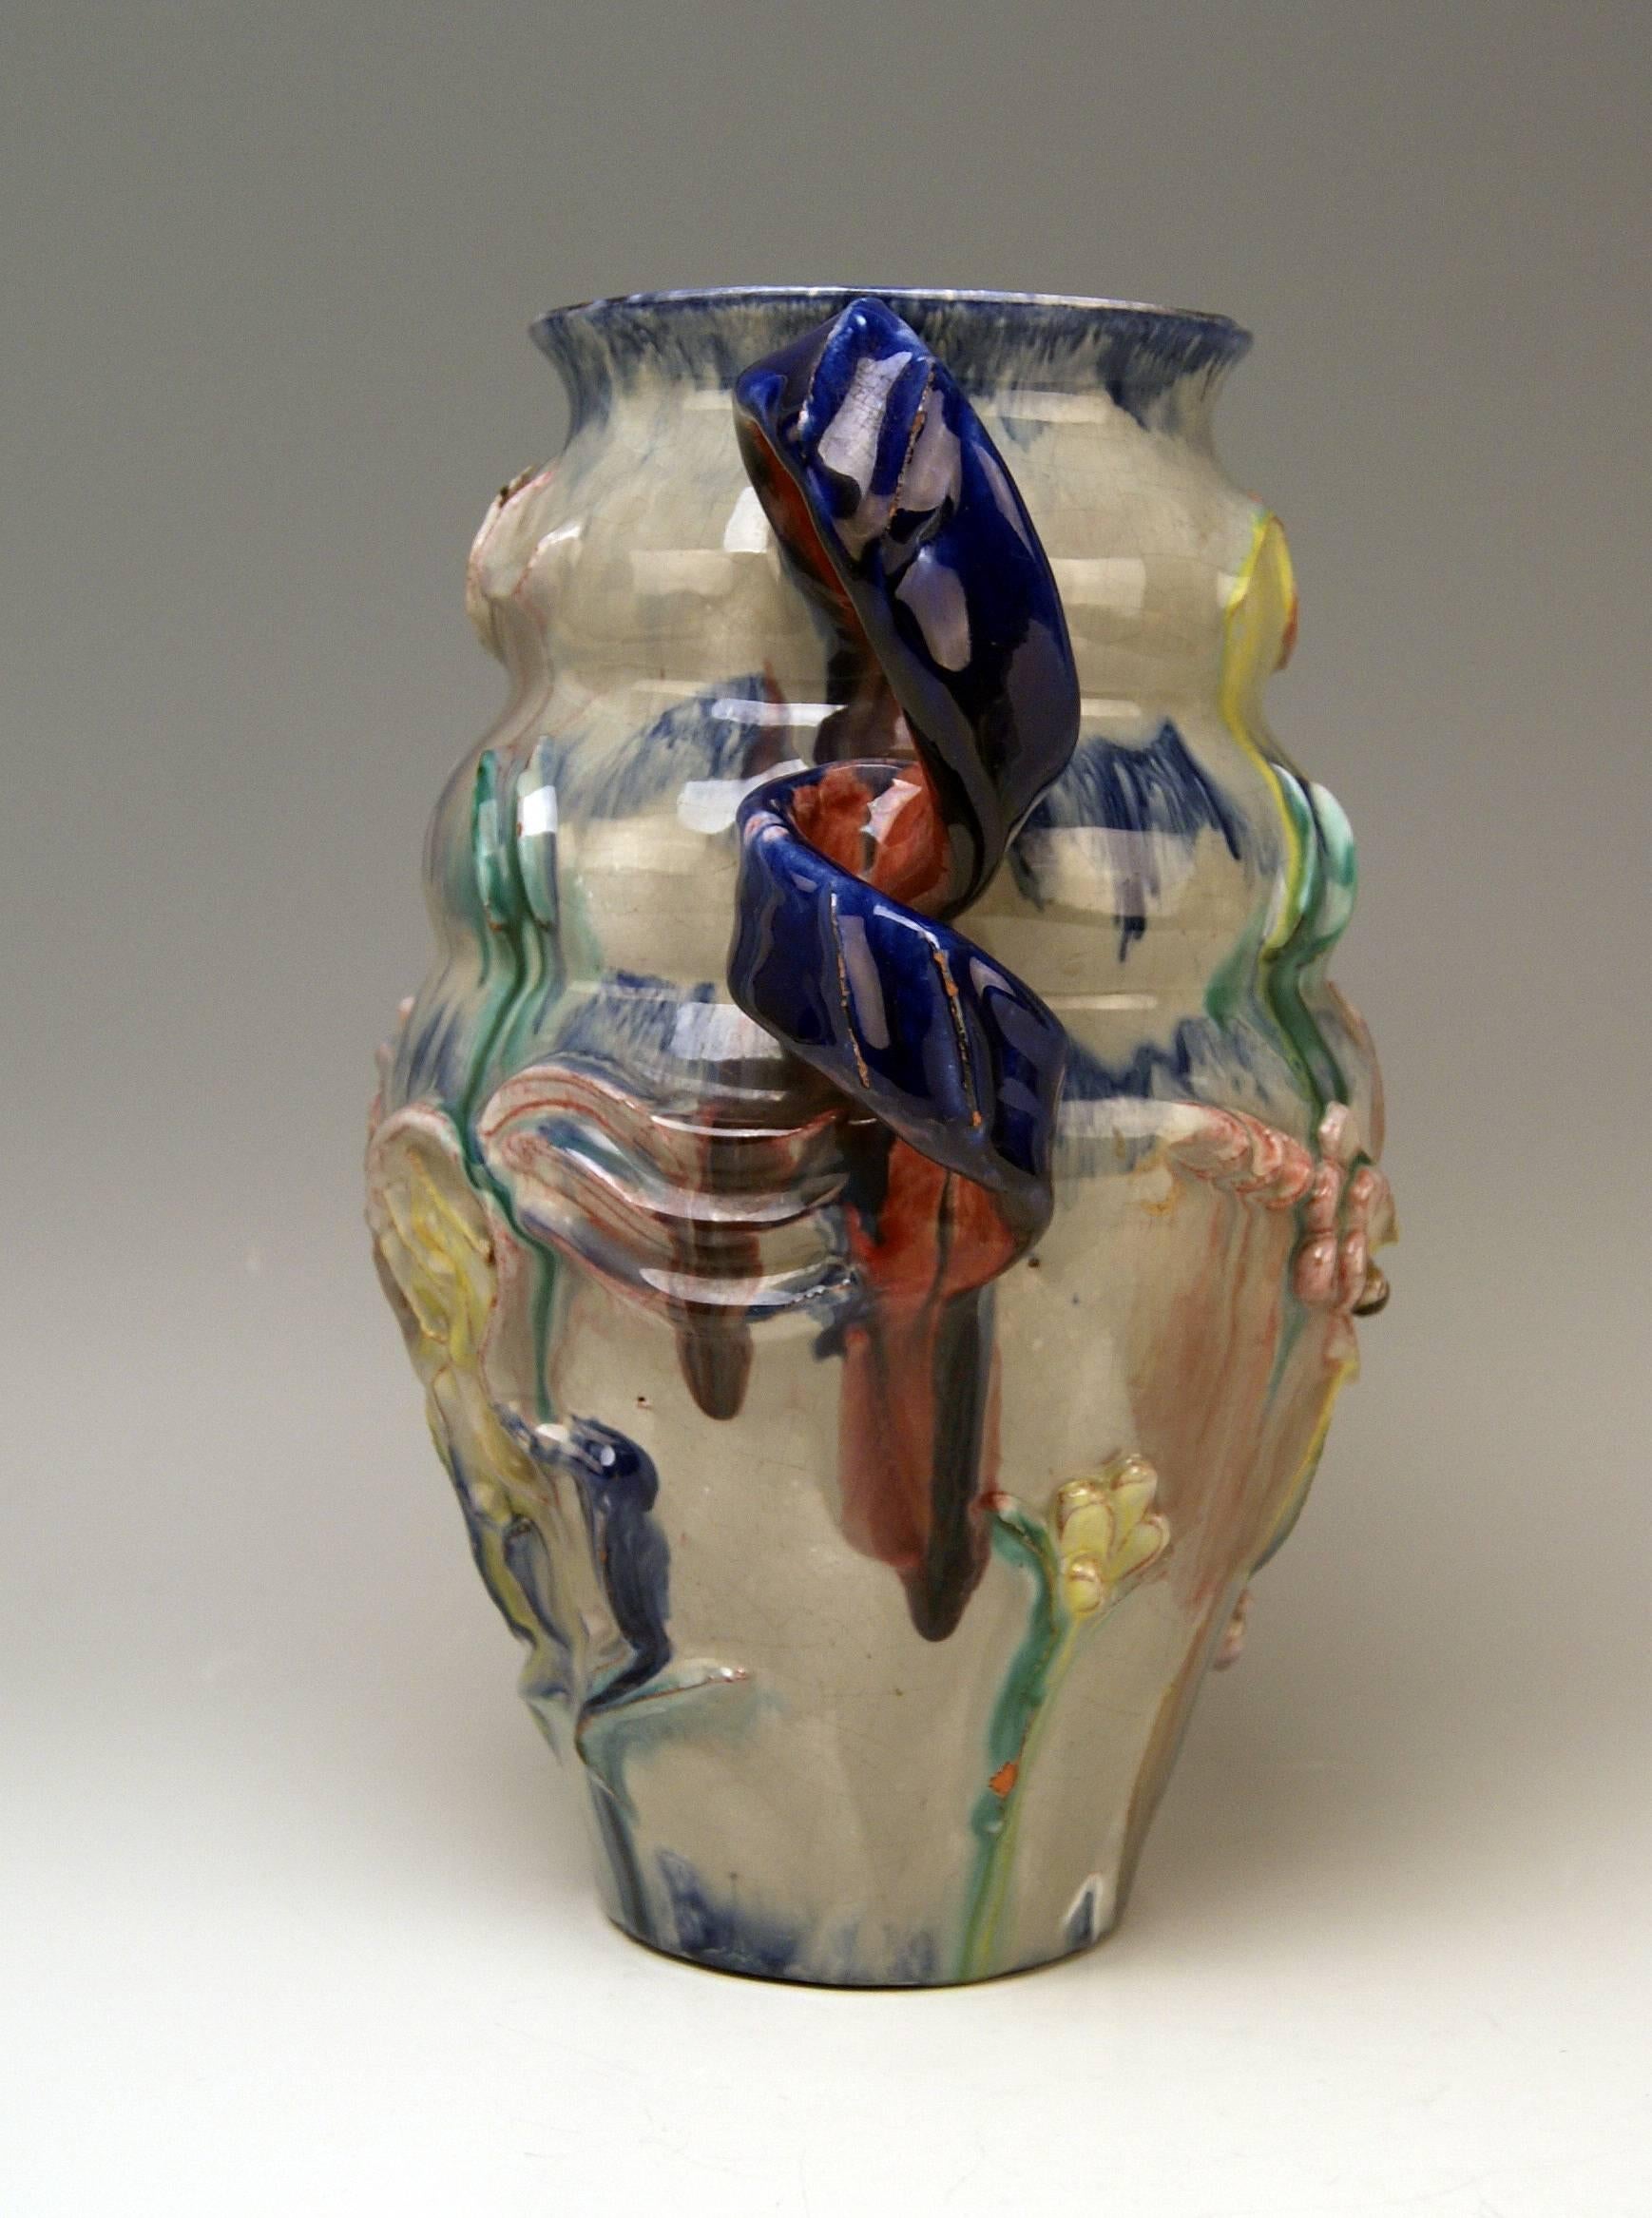 Austrian Ceramics Vase made in excellent style of Expressionism, designed by Vally Wieselthier  (1895 - 1945)
made circa 1923 - 25
red earthenware, multicoloured painted and glazed

Excellently manufactured ceramics vase of most interesting shape: